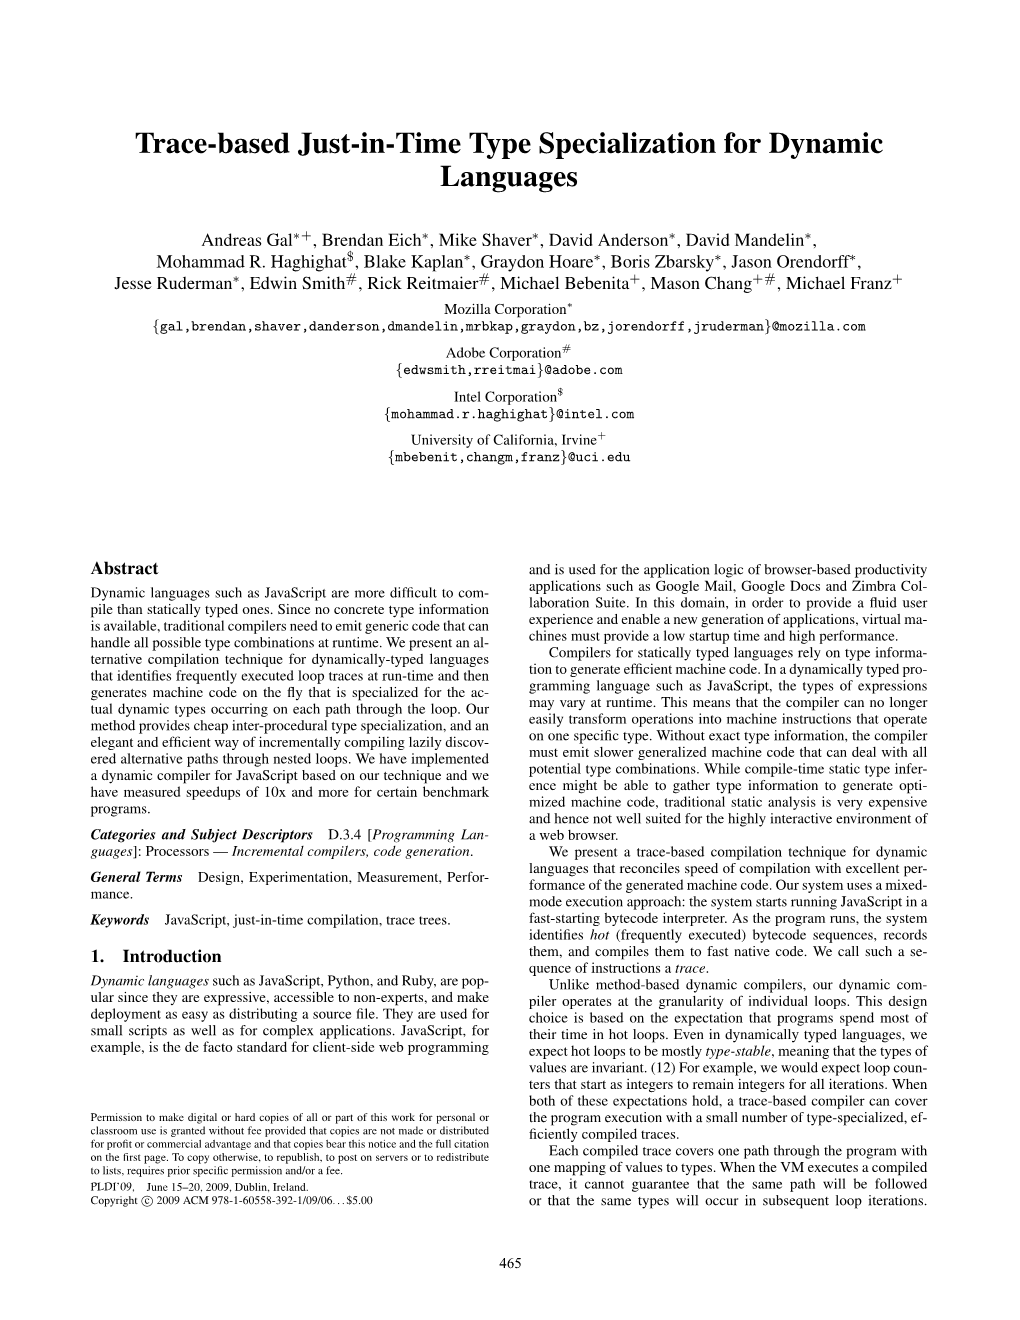 Trace-Based Just-In-Time Type Specialization for Dynamic Languages